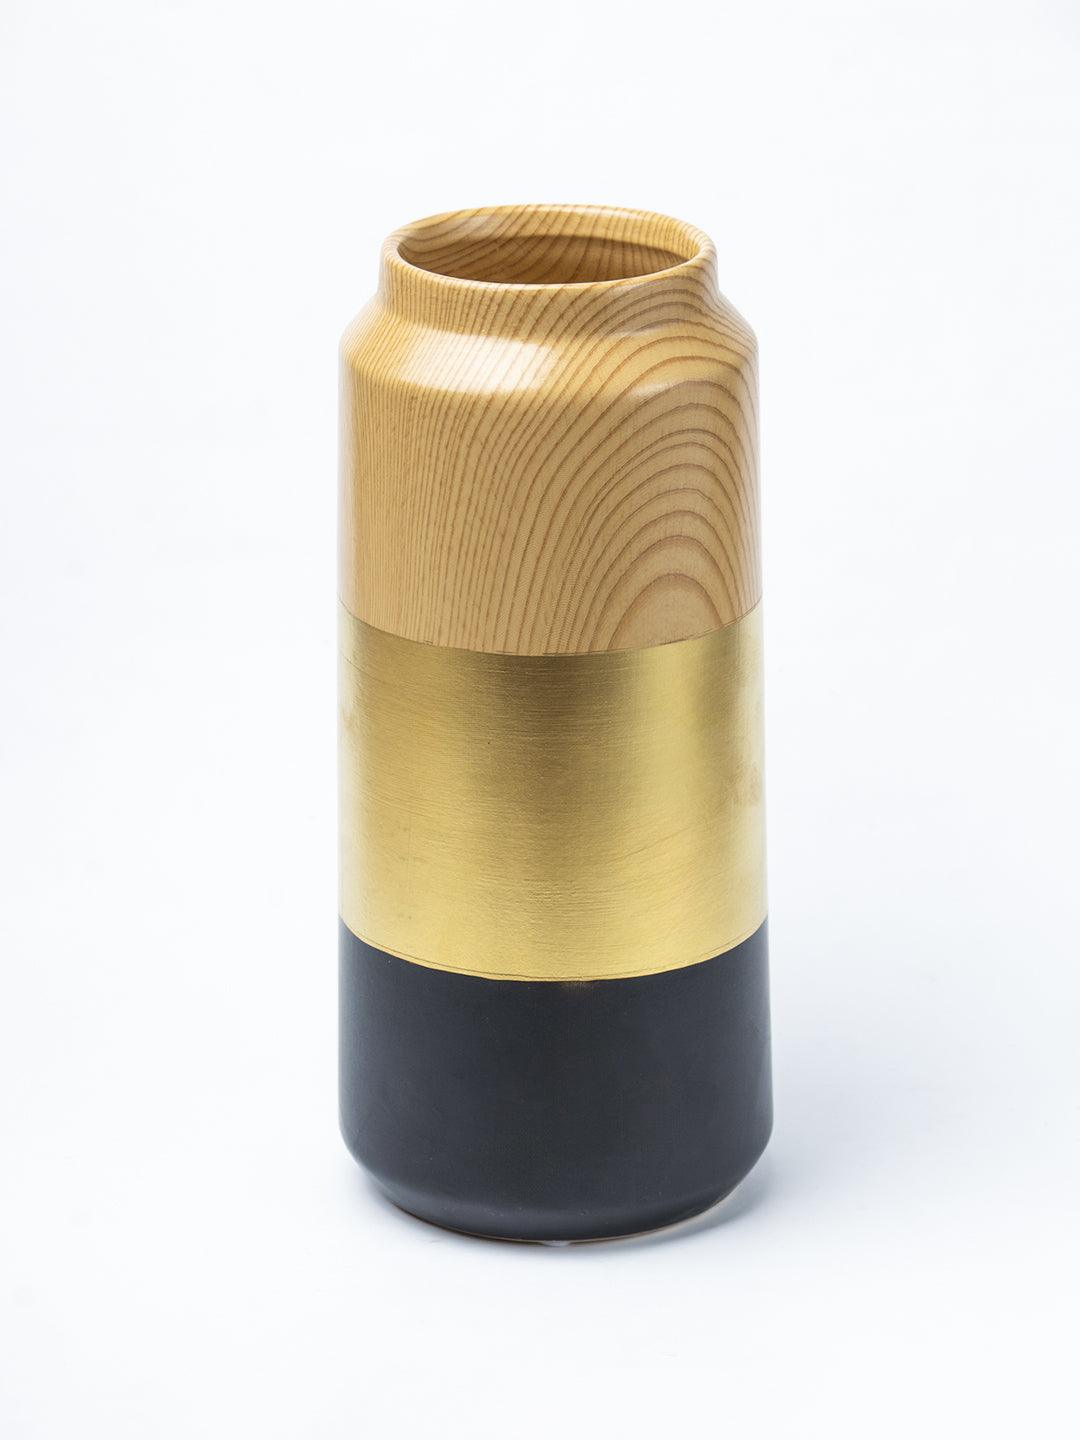 Buy Stylish Ceramic Vase - Wooden, White & Golden, Contemporary Design at  the best price on Tuesday, March 12, 2024 at 5:21 pm +0530 with latest  offers in India. Get Free Shipping